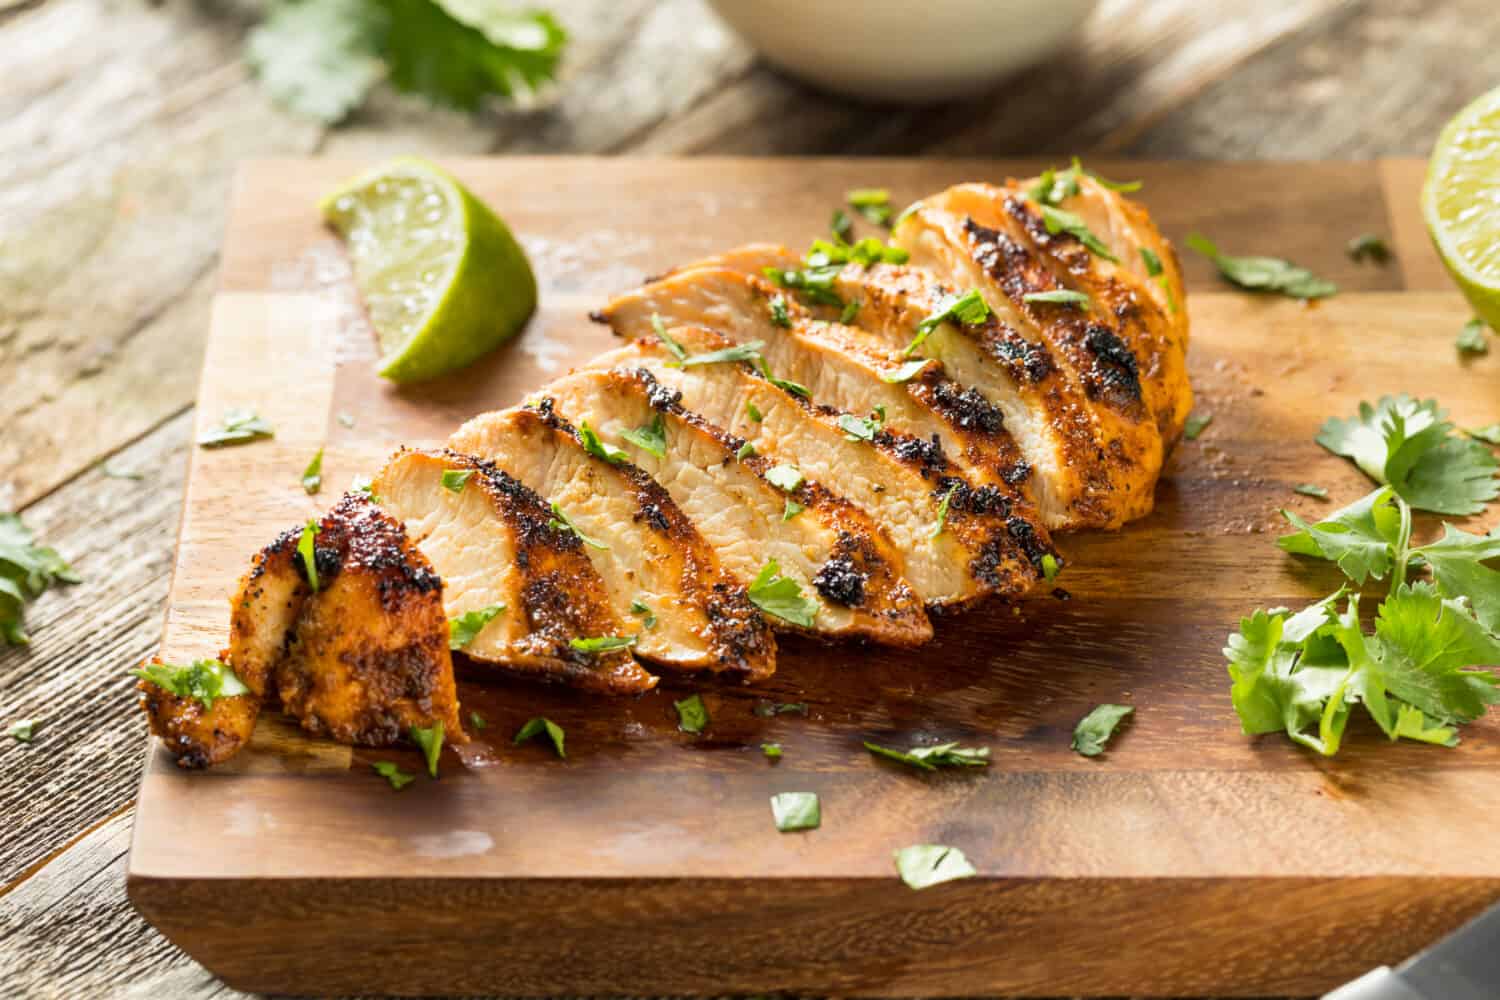 Homemade Grilled Chipotle Chicken Breast with Cilantro and LIme